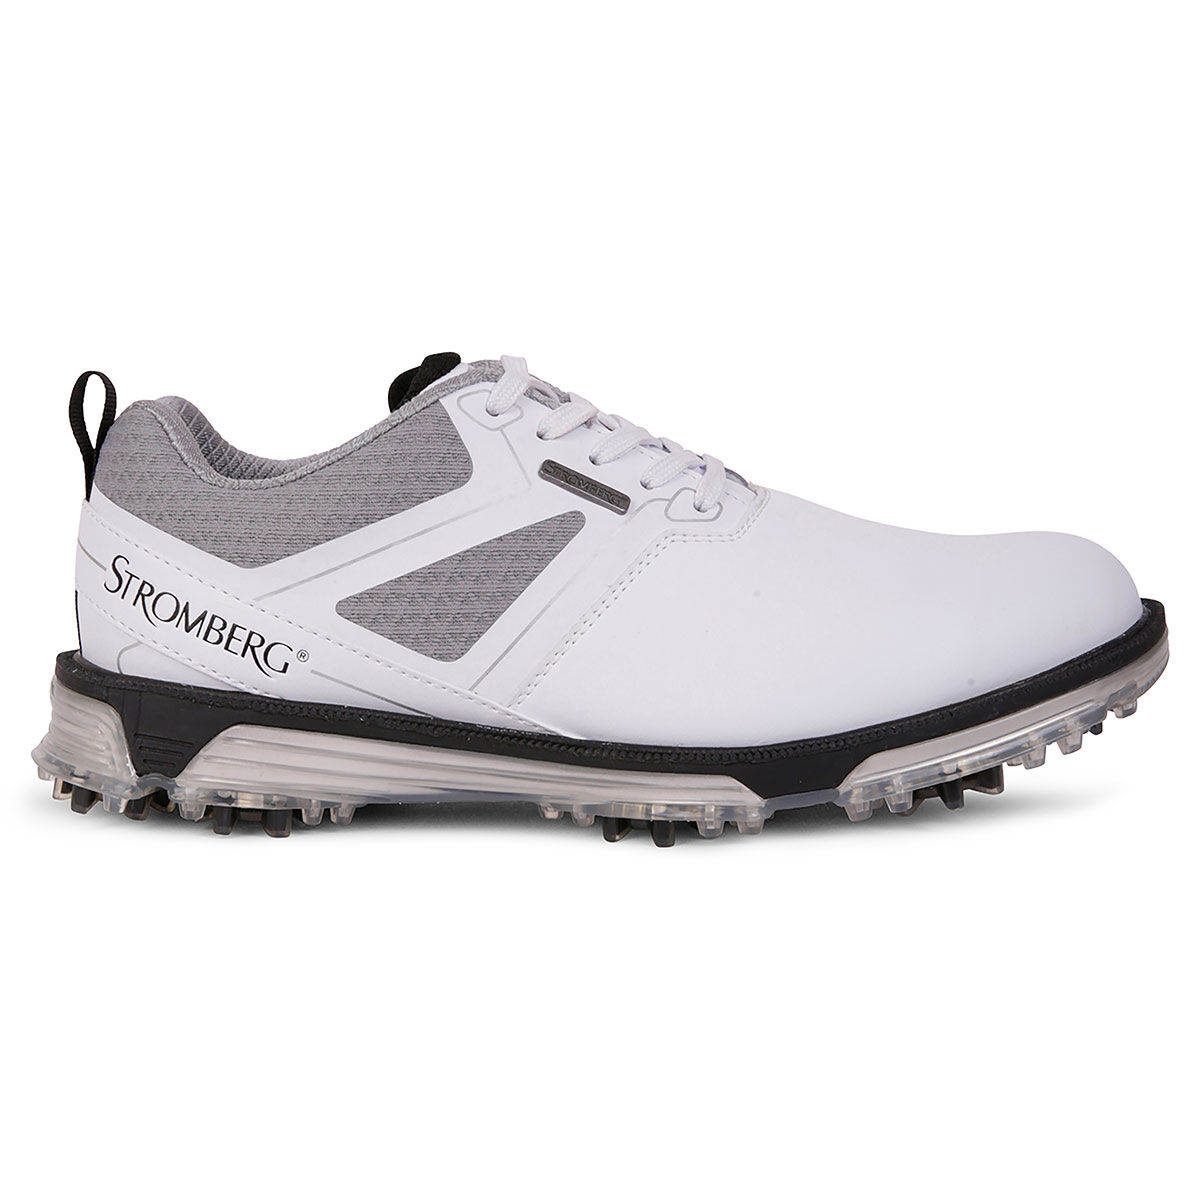 Stromberg Men's Tour Classic Waterproof Spiked Golf Shoes, Mens, White, 11 | American Golf von Stromberg